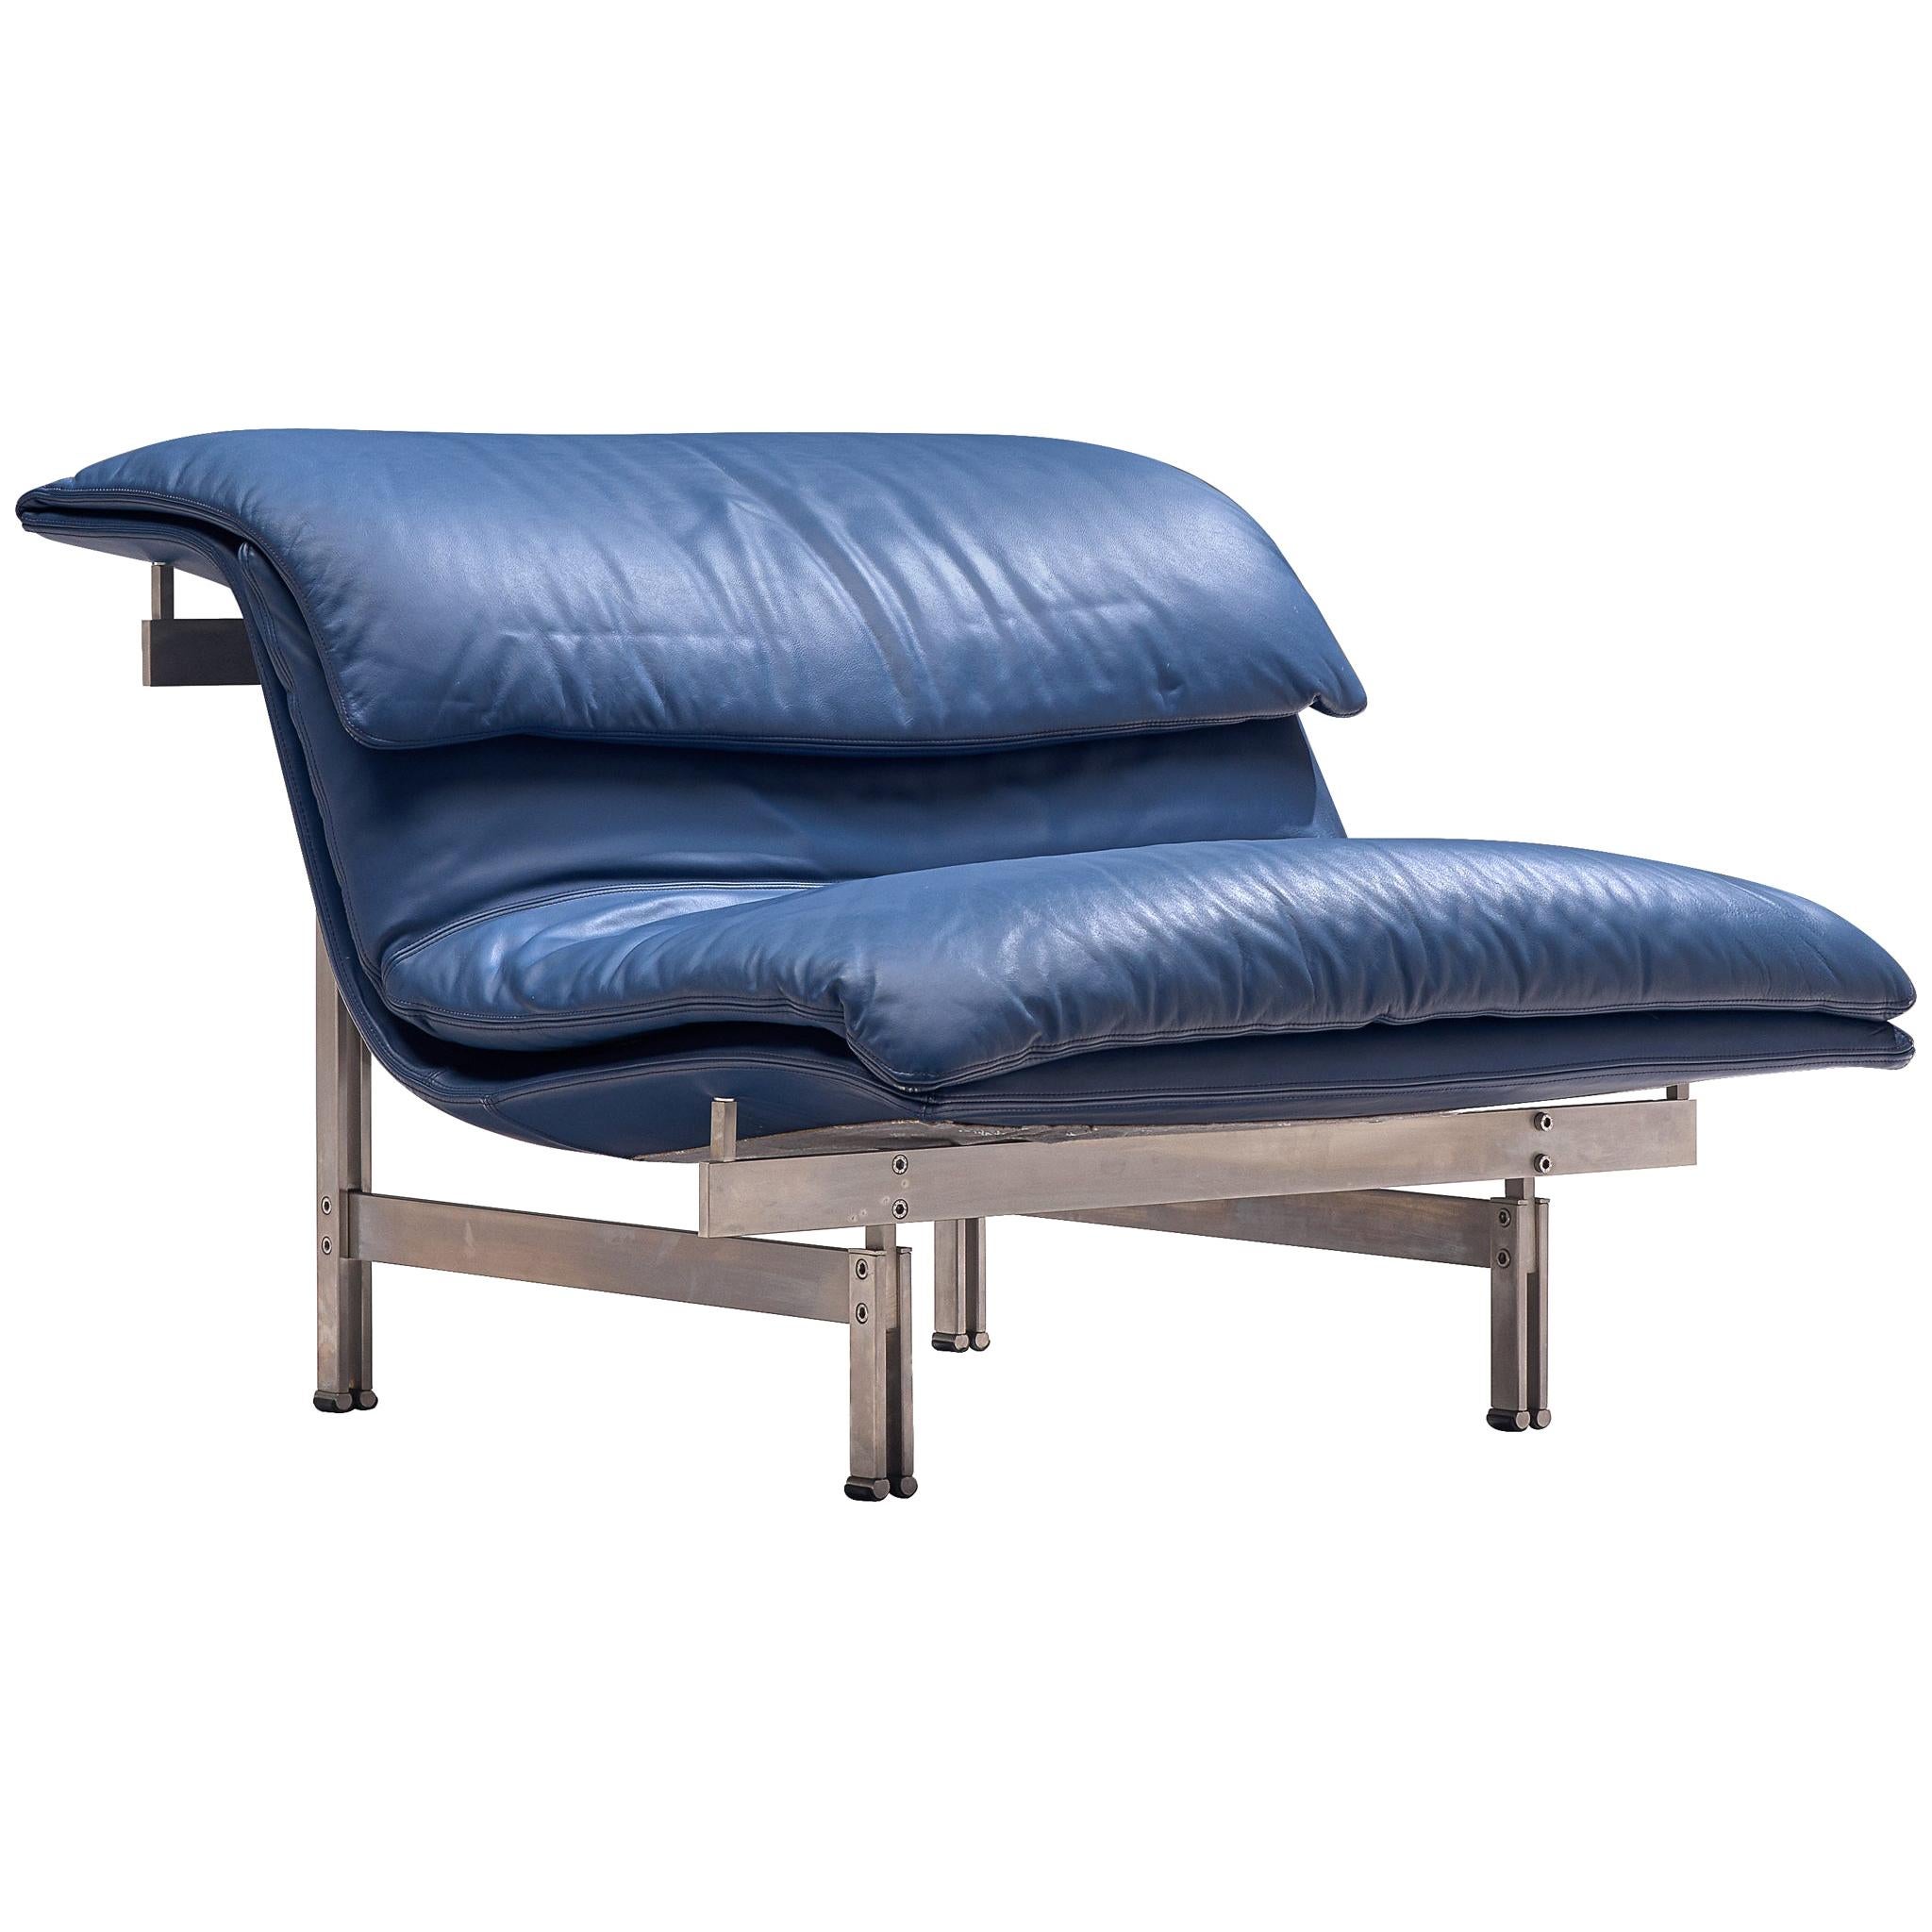 Giovanni Offredi 'Wave' Lounge Chair in Night Blue Leather